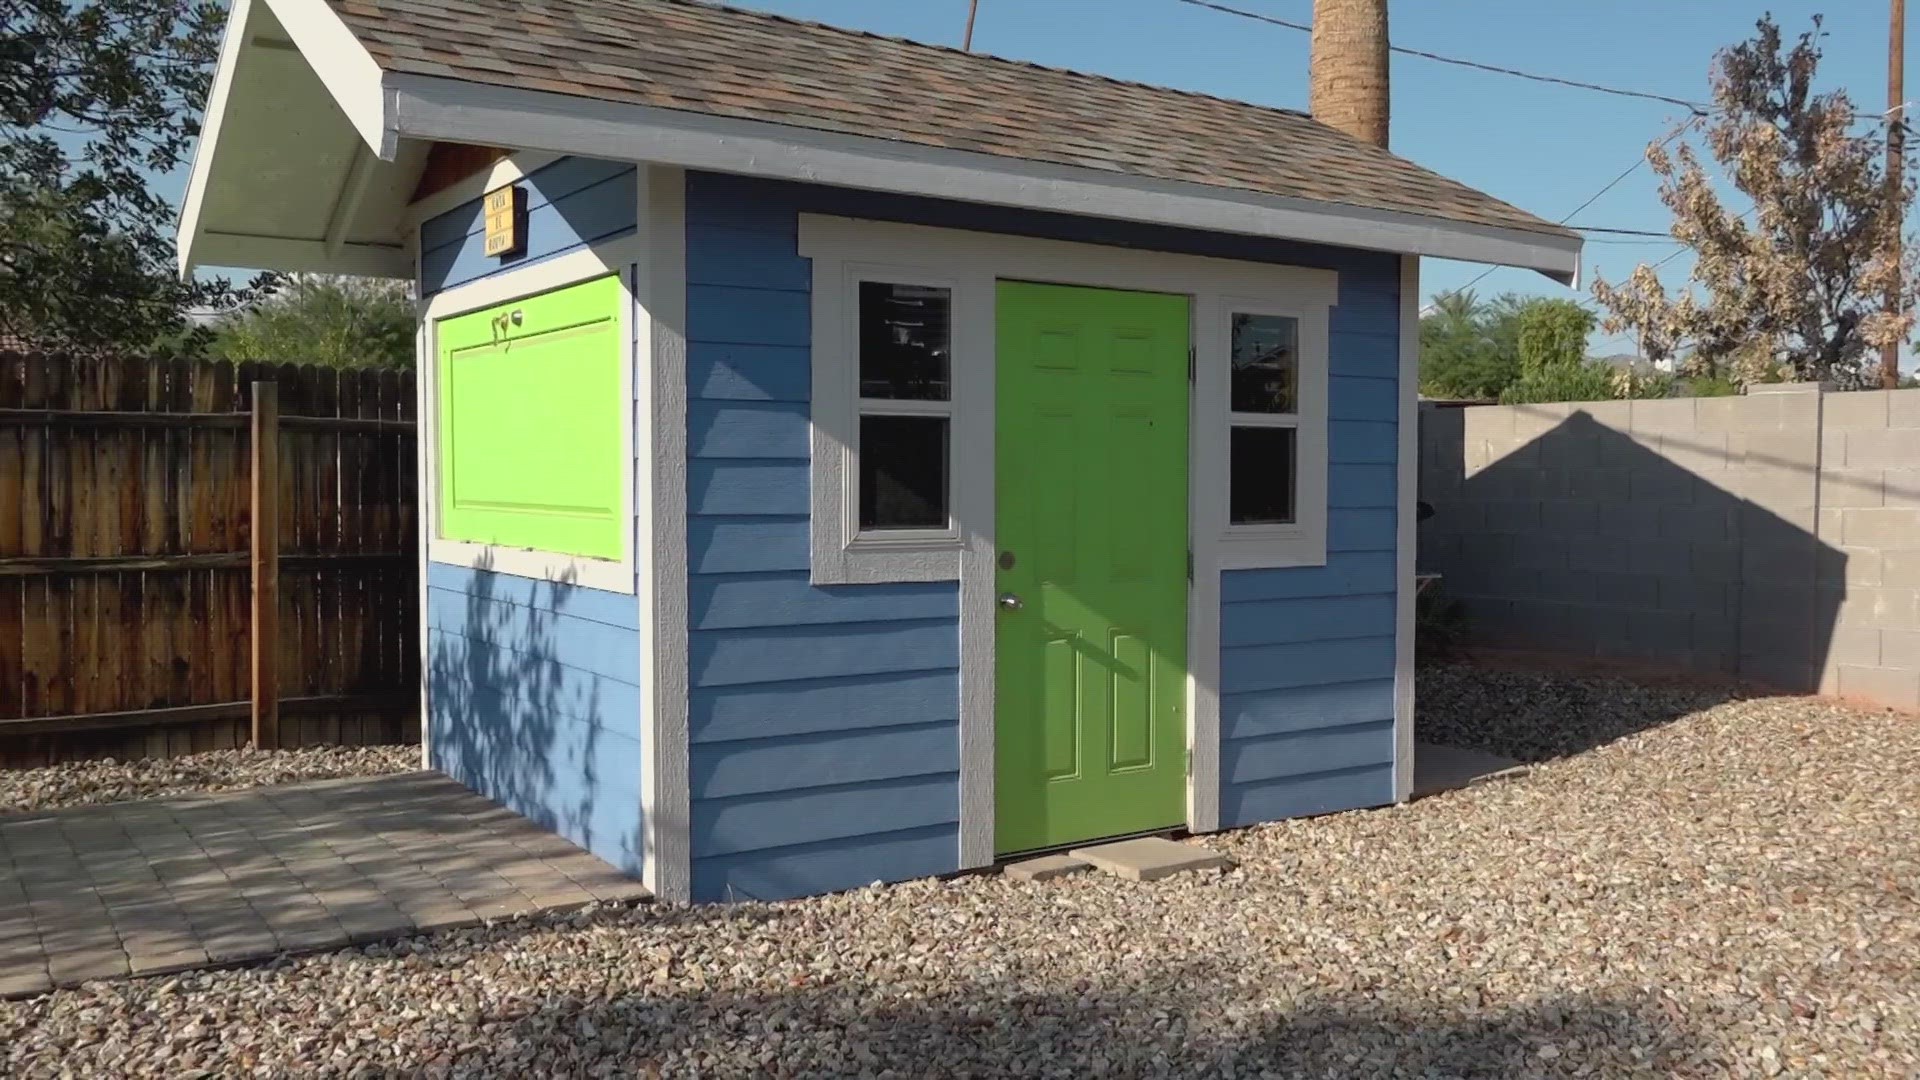 Phoenix City Council will vote Wednesday to allow homeowners to build casitas, guest houses, or in-law suites in their backyard.